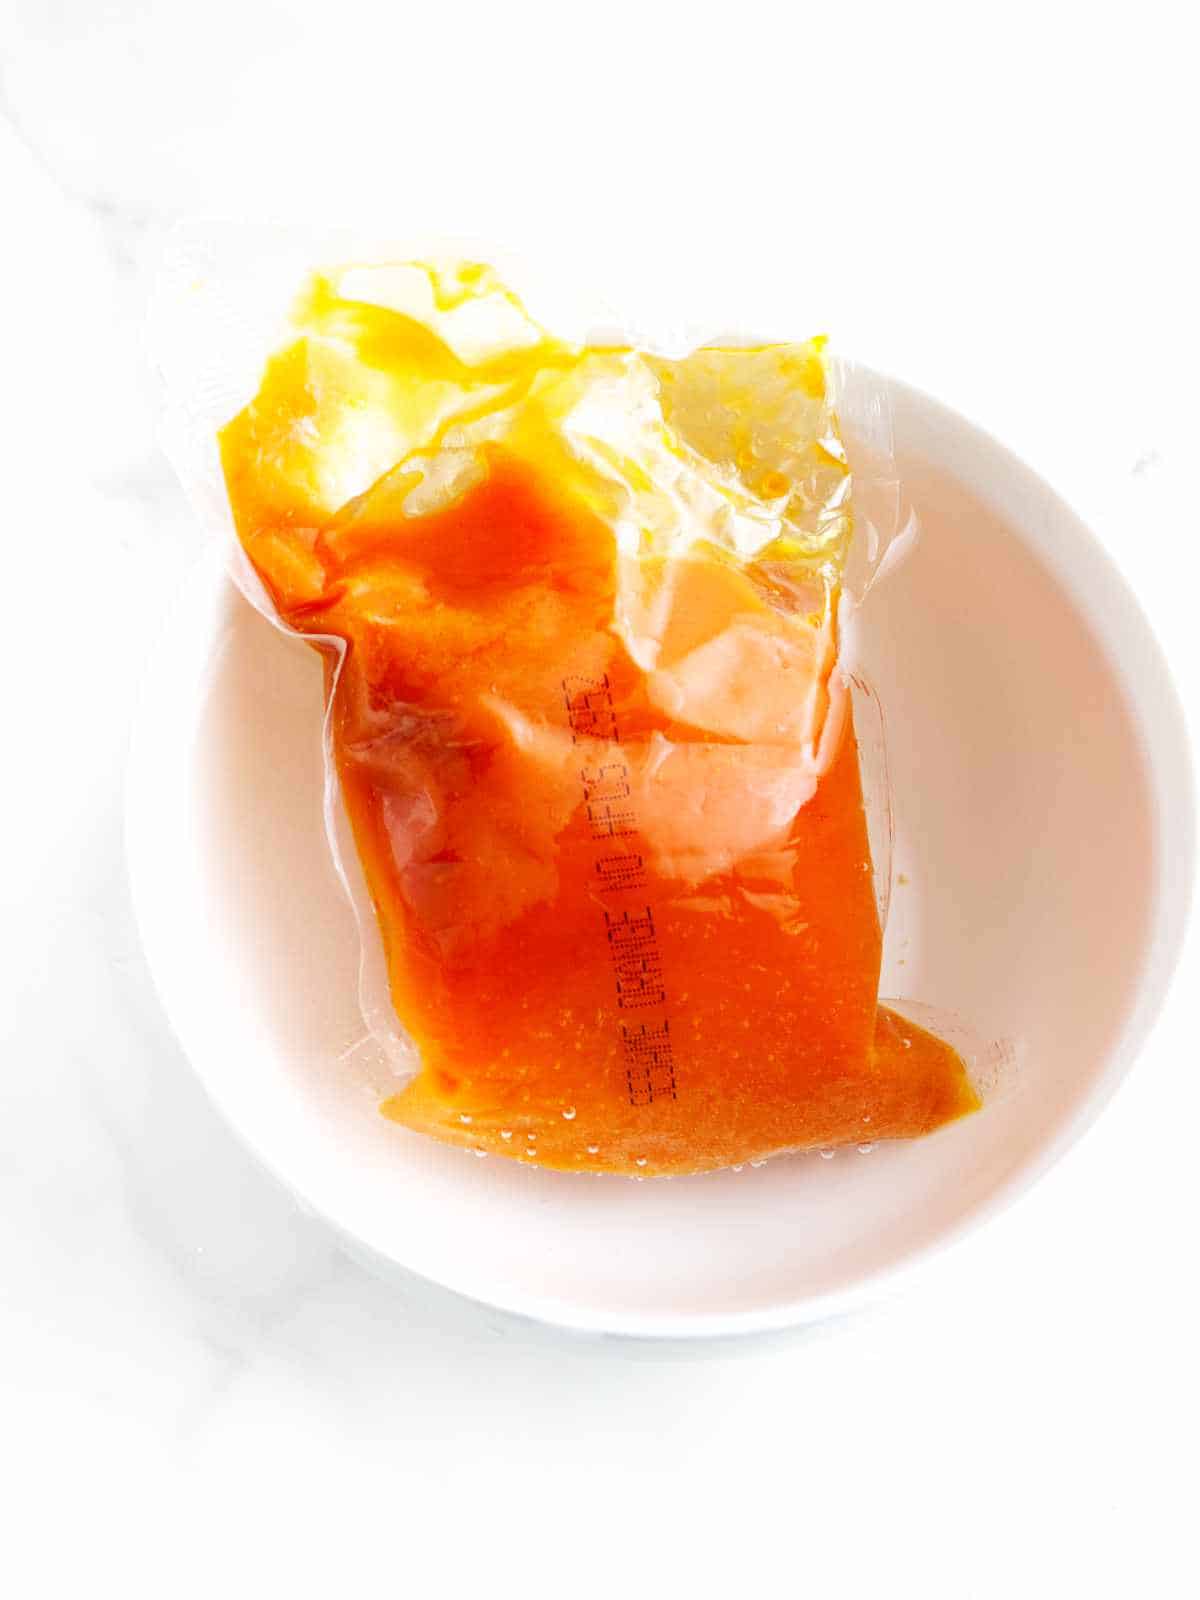 packet of orange citrus sauce in a bowl of hot water on a white background.